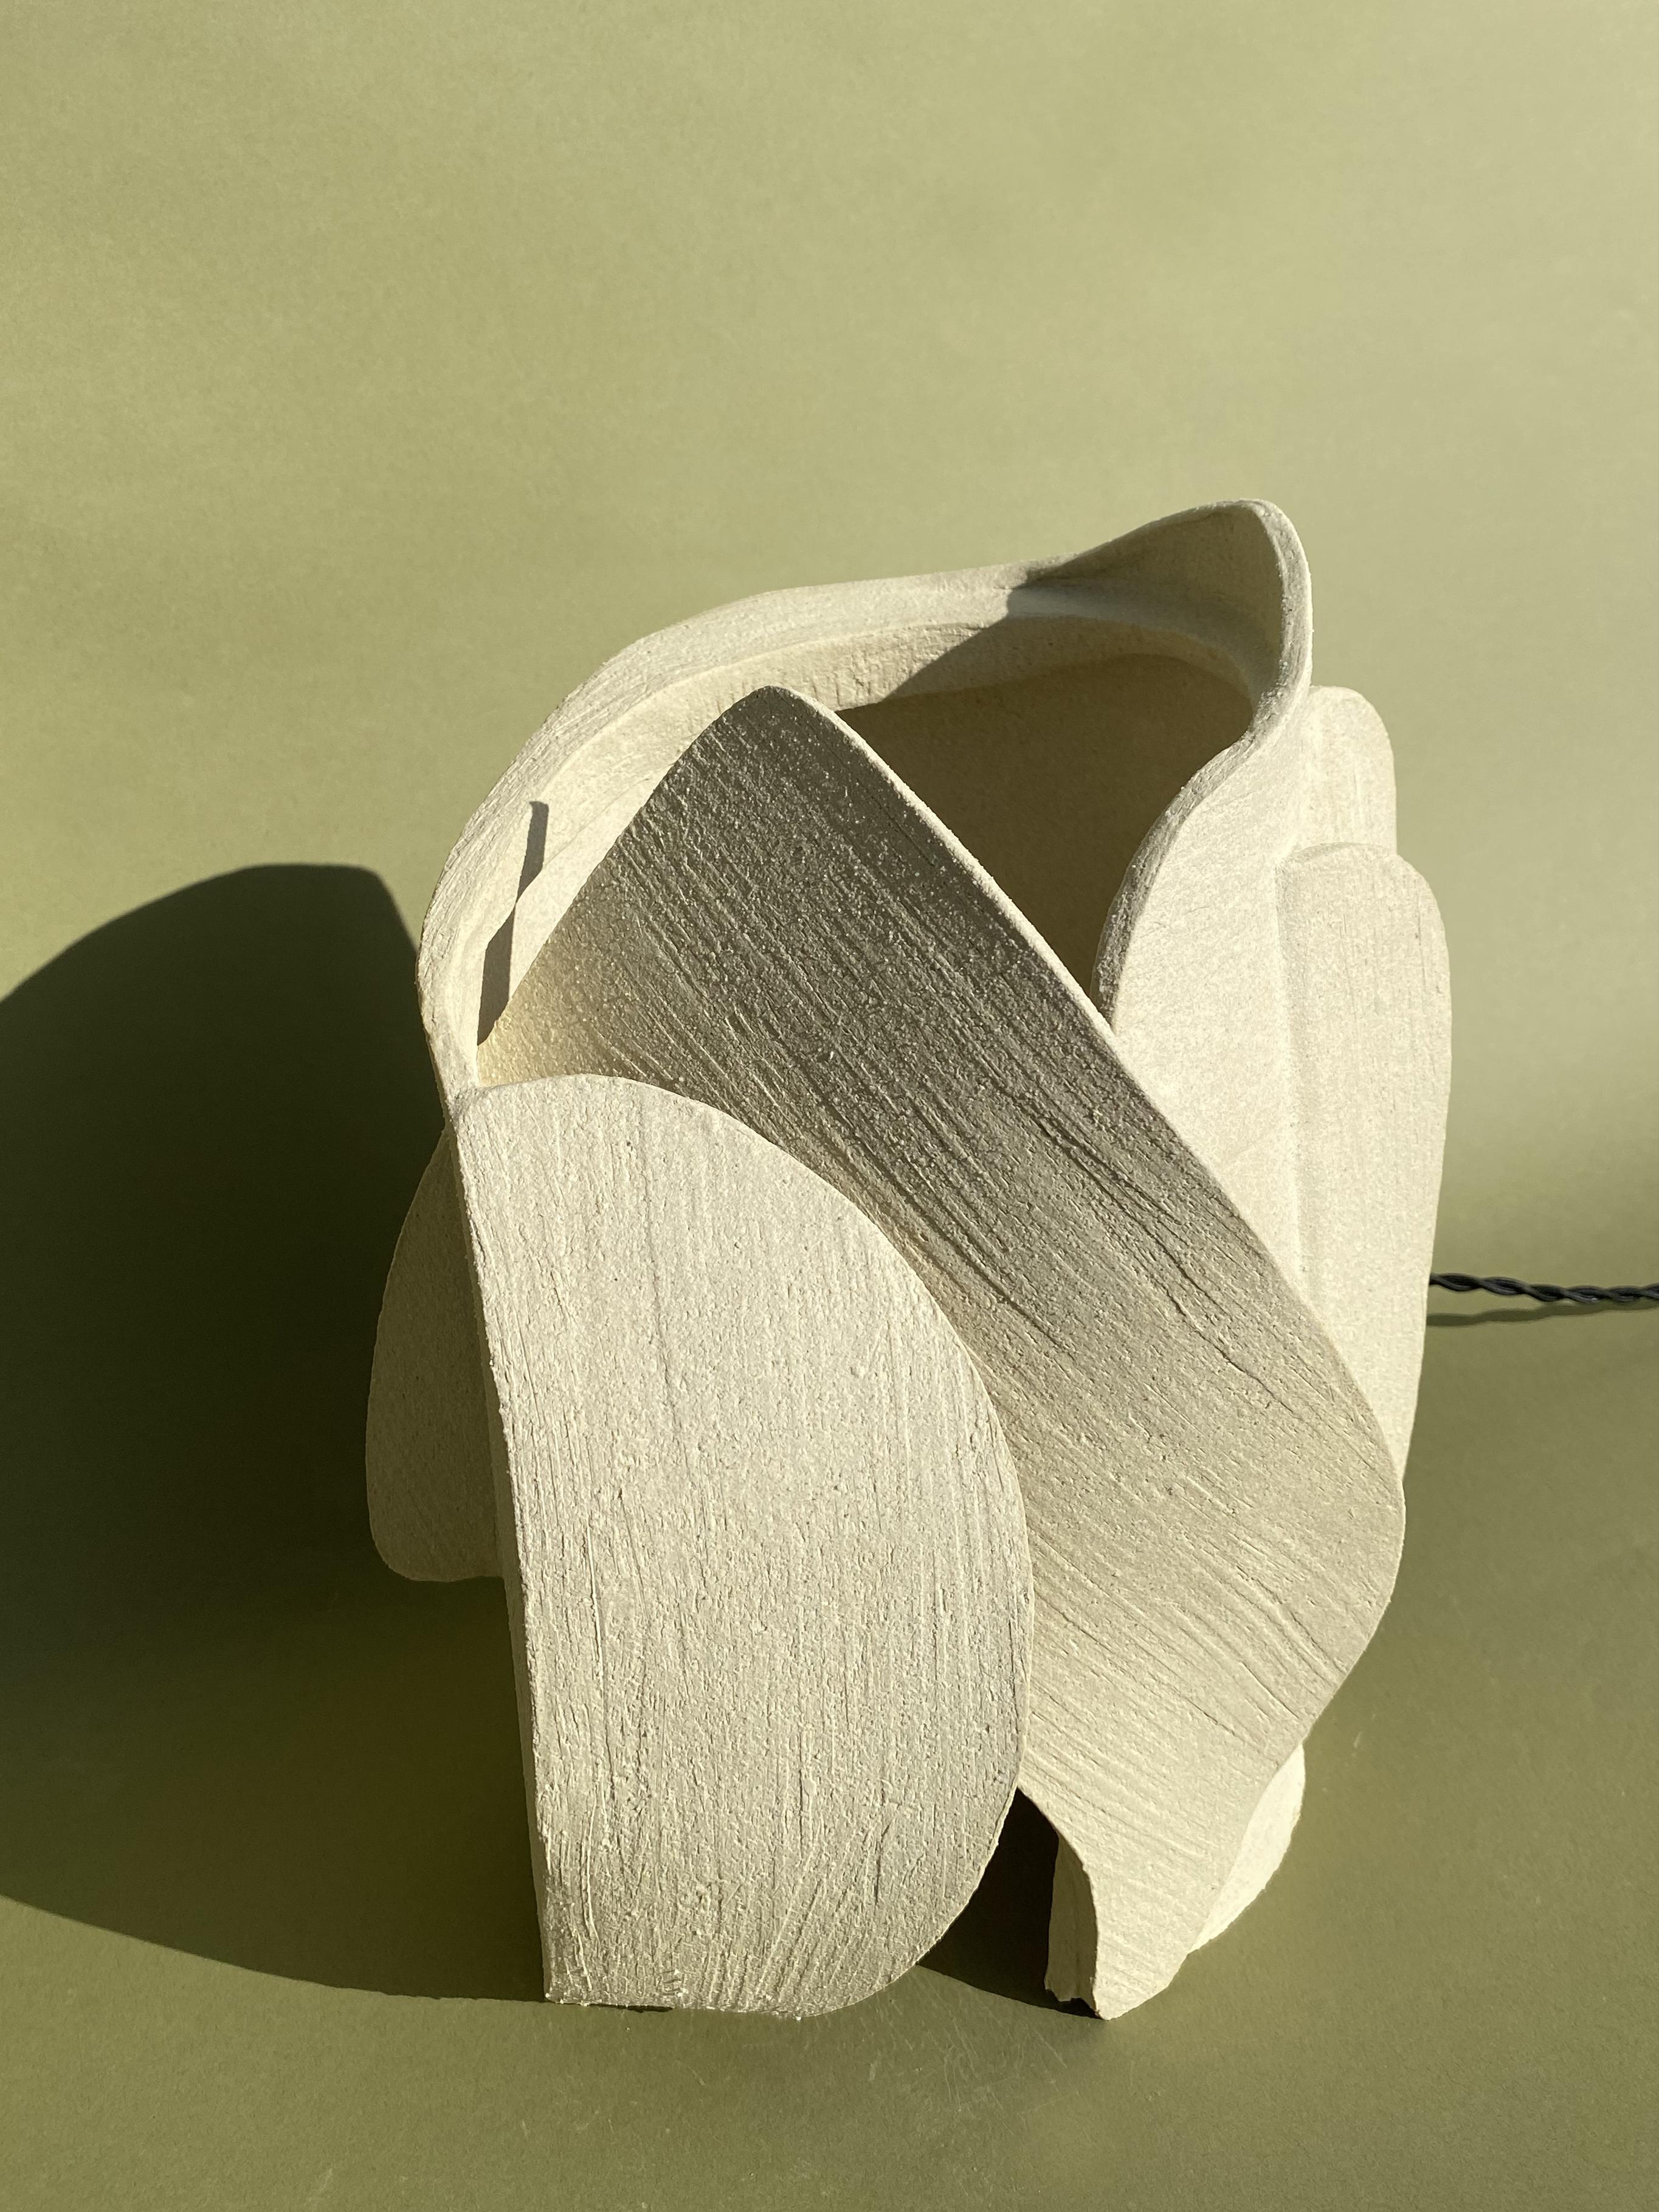 Ceramic Table Lamp by Olivia Cognet 1